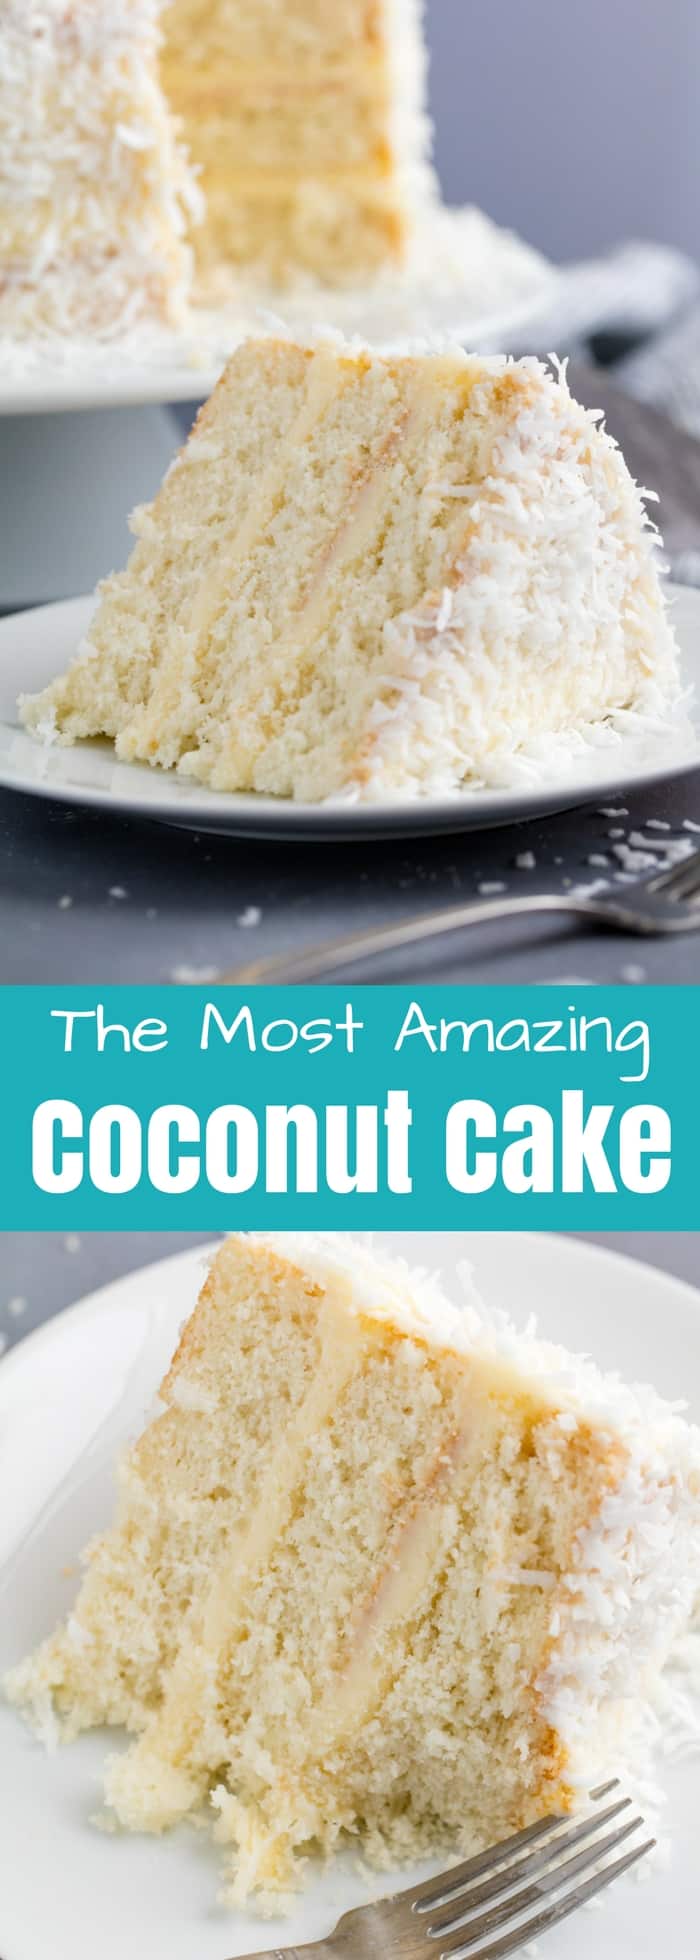 This Coconut Cake Recipe is made from scratch and full of bold coconut flavor and topped off with a coconut cream cheese frosting. This is the kind of cake that will wow everyone in the room!